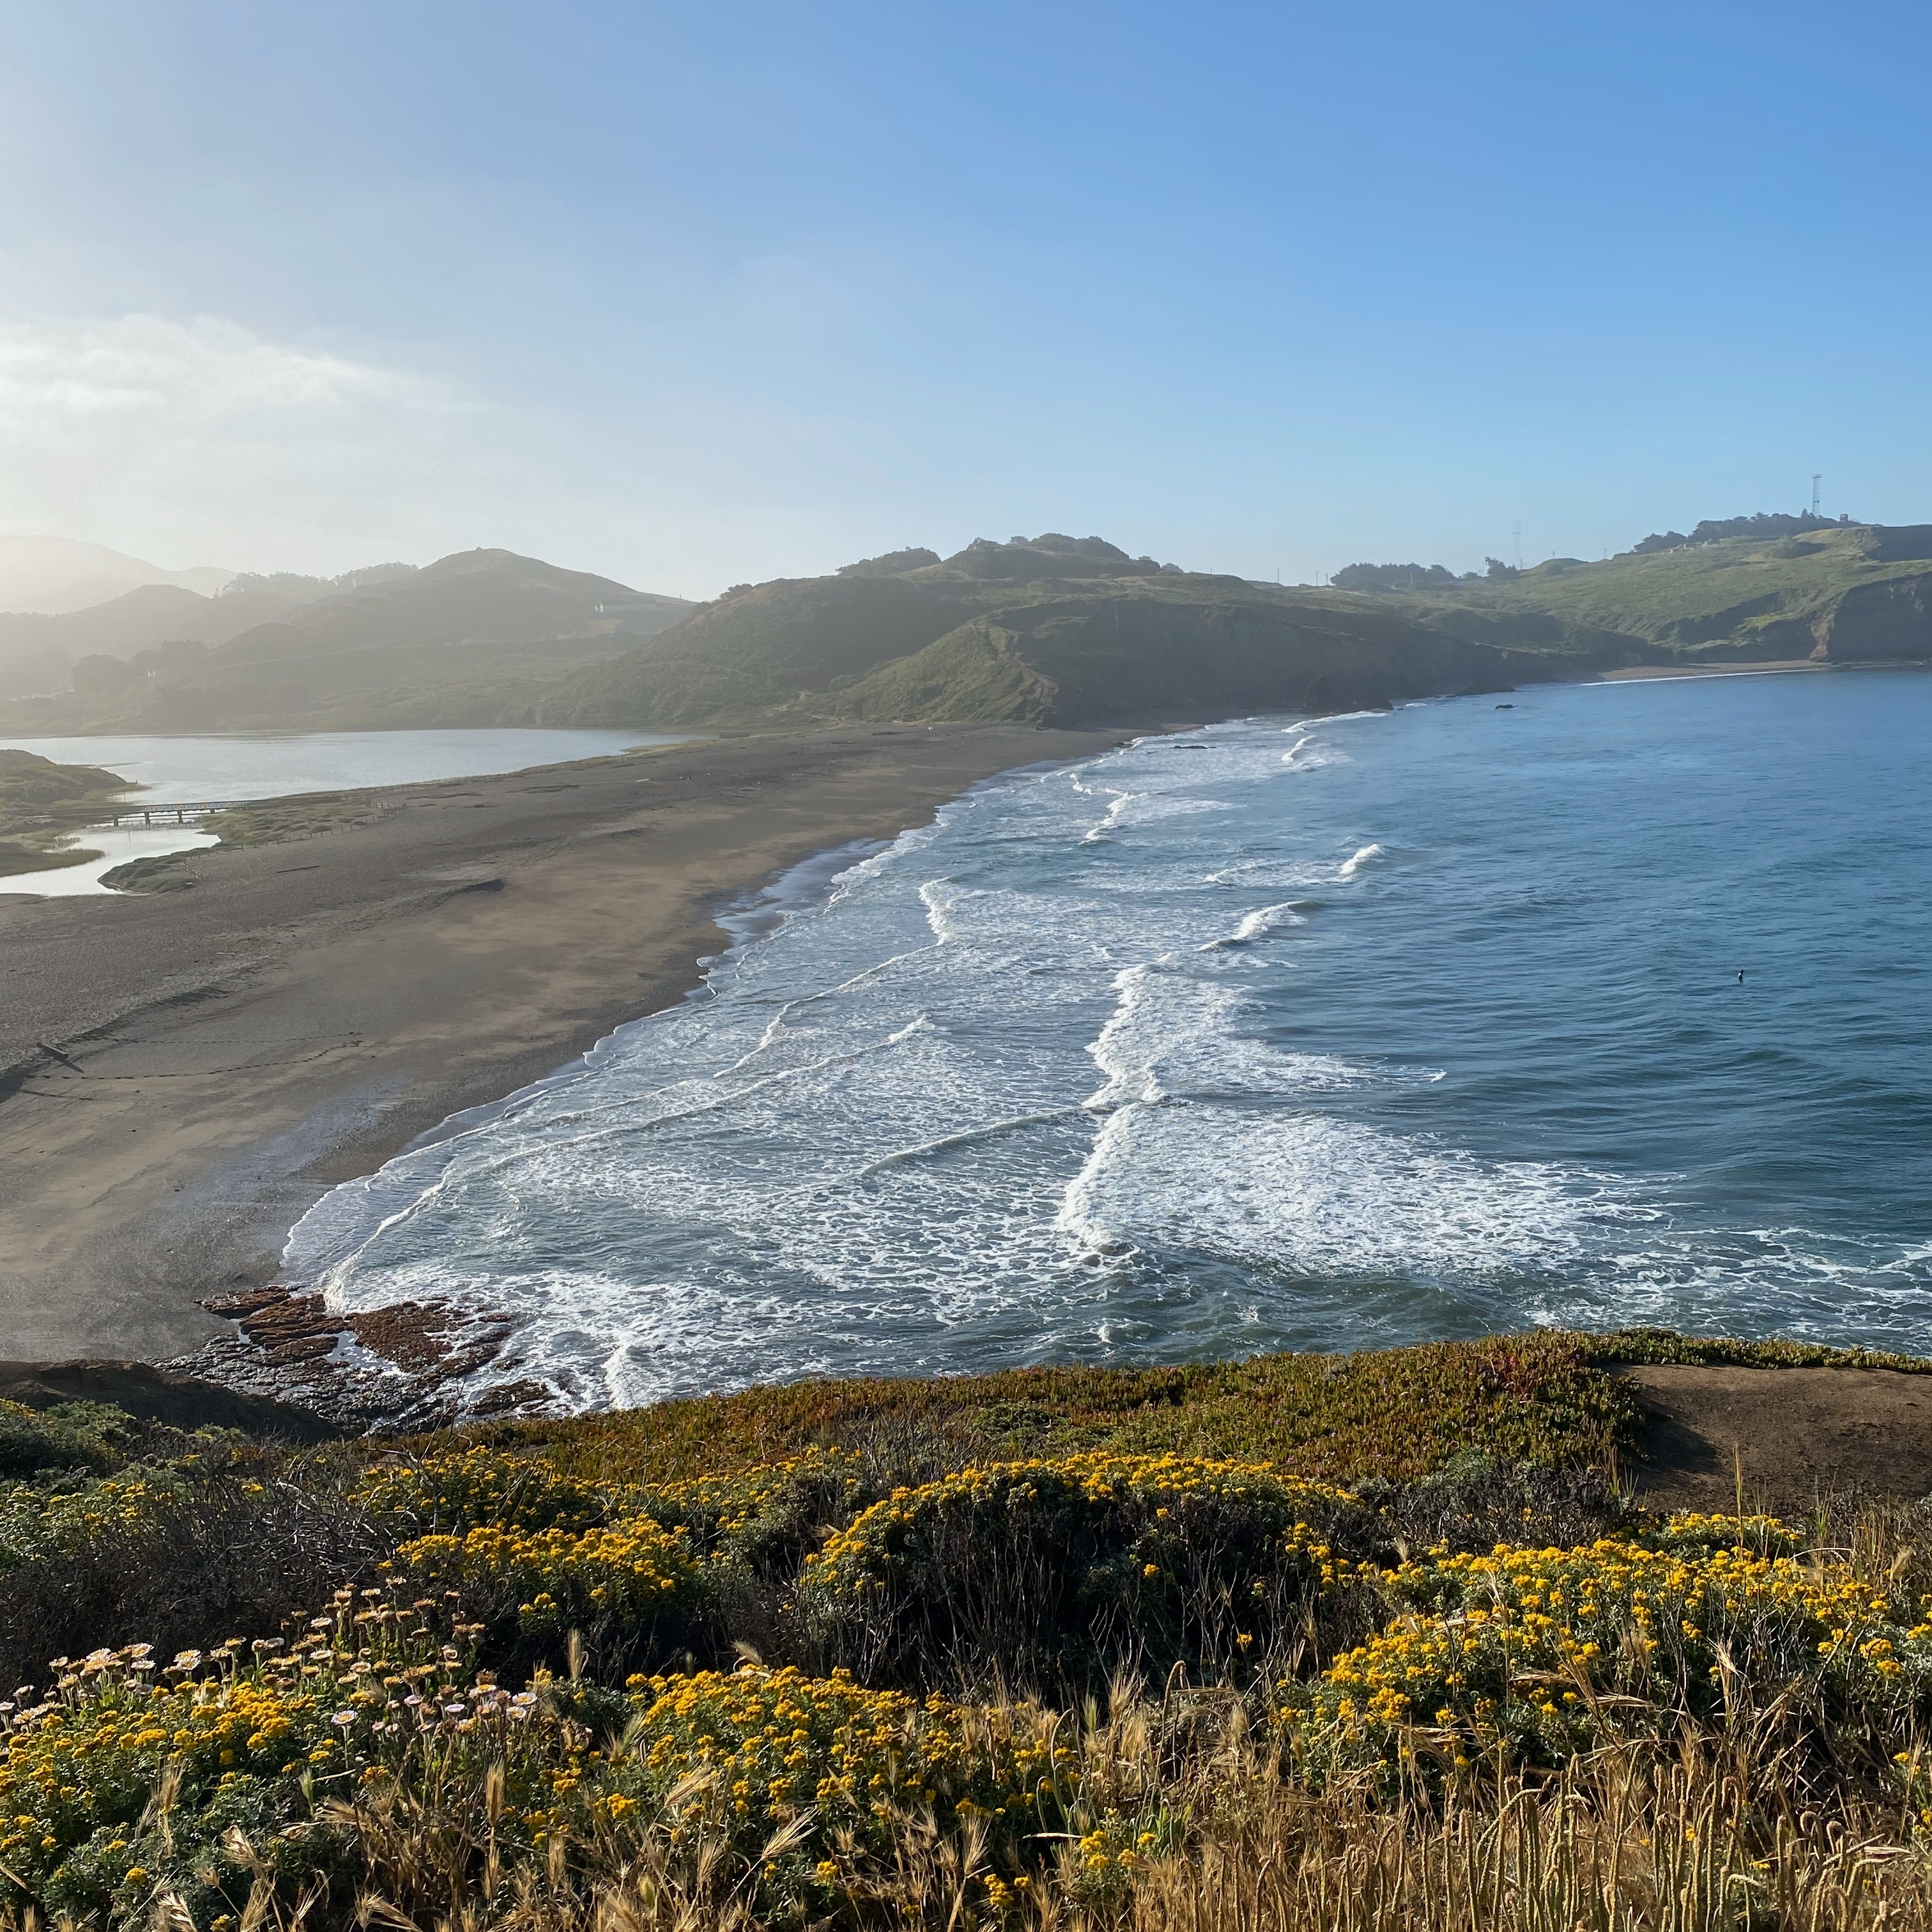 View of Rodeo Beach from the Coastal Trail leading up to Hill 88